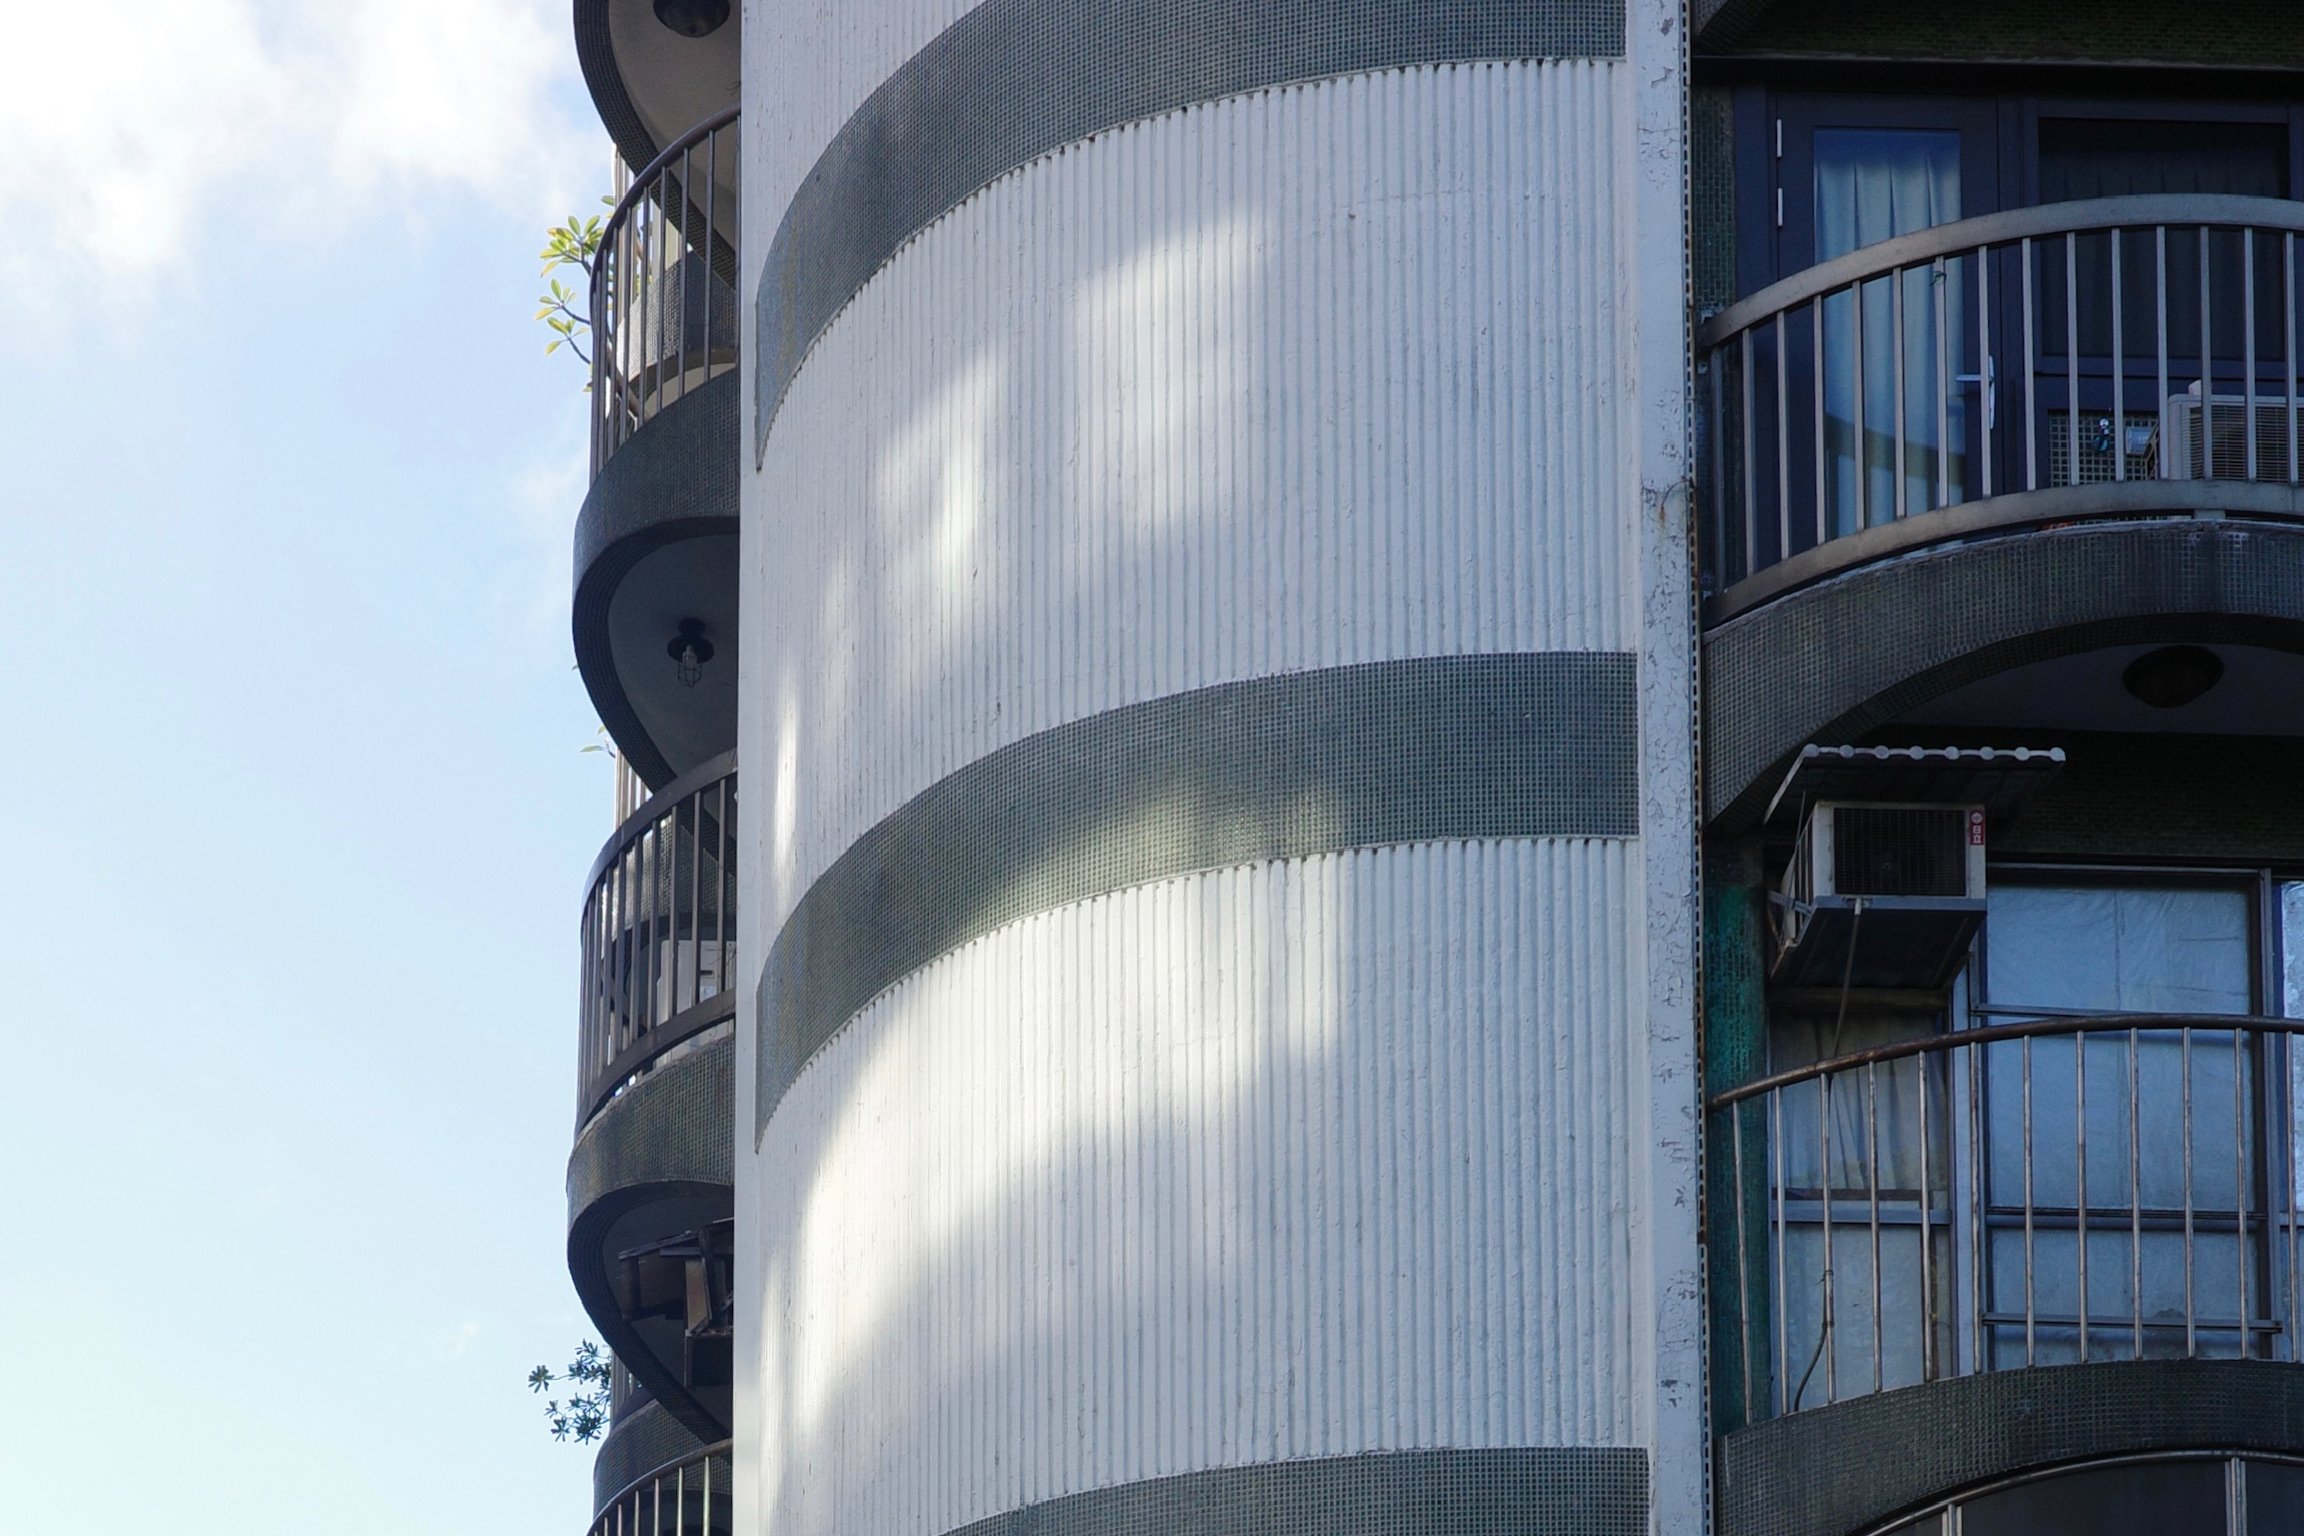 Shadow casted on a white tiled building with faded dark green strips and curved corners. Semicircle-shaped balconies. Clear blue sky.